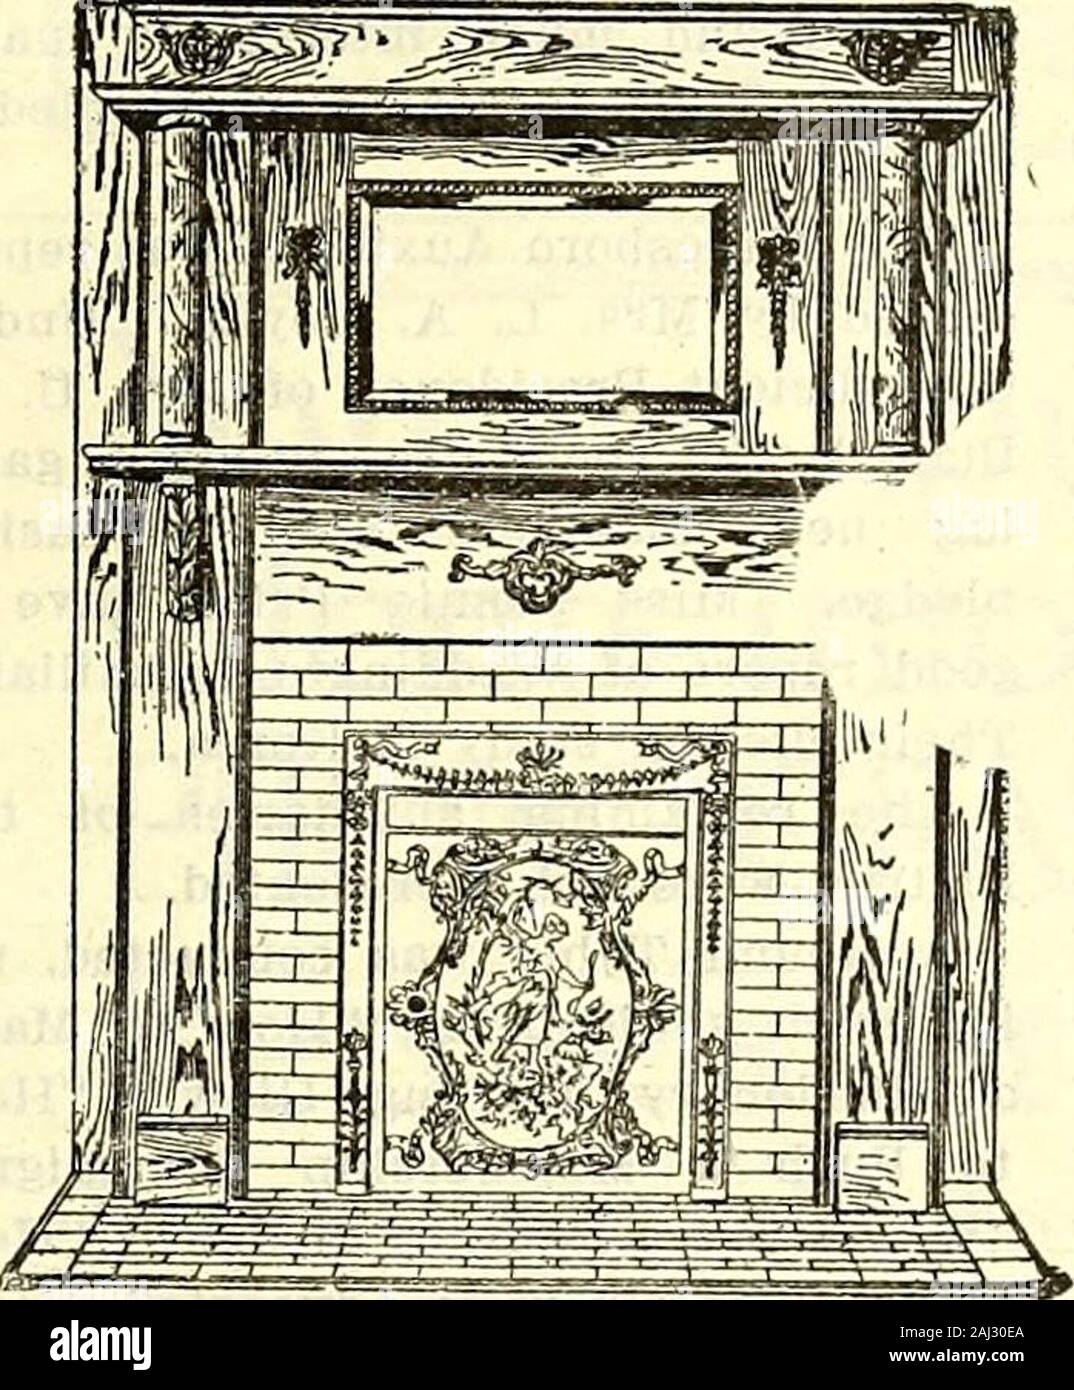 North Carolina Christian advocate [serial] . Hardwood Mantels THAT PLEASE Grates and Tiles THAT HARMONIZE Get Our Catalogue. Free tothose who are interested. Odell Mantel Co., (Owned b; Odell Hardware Co.) GREENSBORO. N. C. North State Life Insurance Co., Of KINSTON. N. C. An Old-Line, Legal Reserve Company. Operates only in the two Carolinas and has more Caro-lina Lives insured than any other Carolina Company.JSgents wanted where not already represented. Farming as a Business. People who live in cities, where lifeIs one continuous rush and whirl, areso engrossed in the struggle for exist-ence Stock Photo